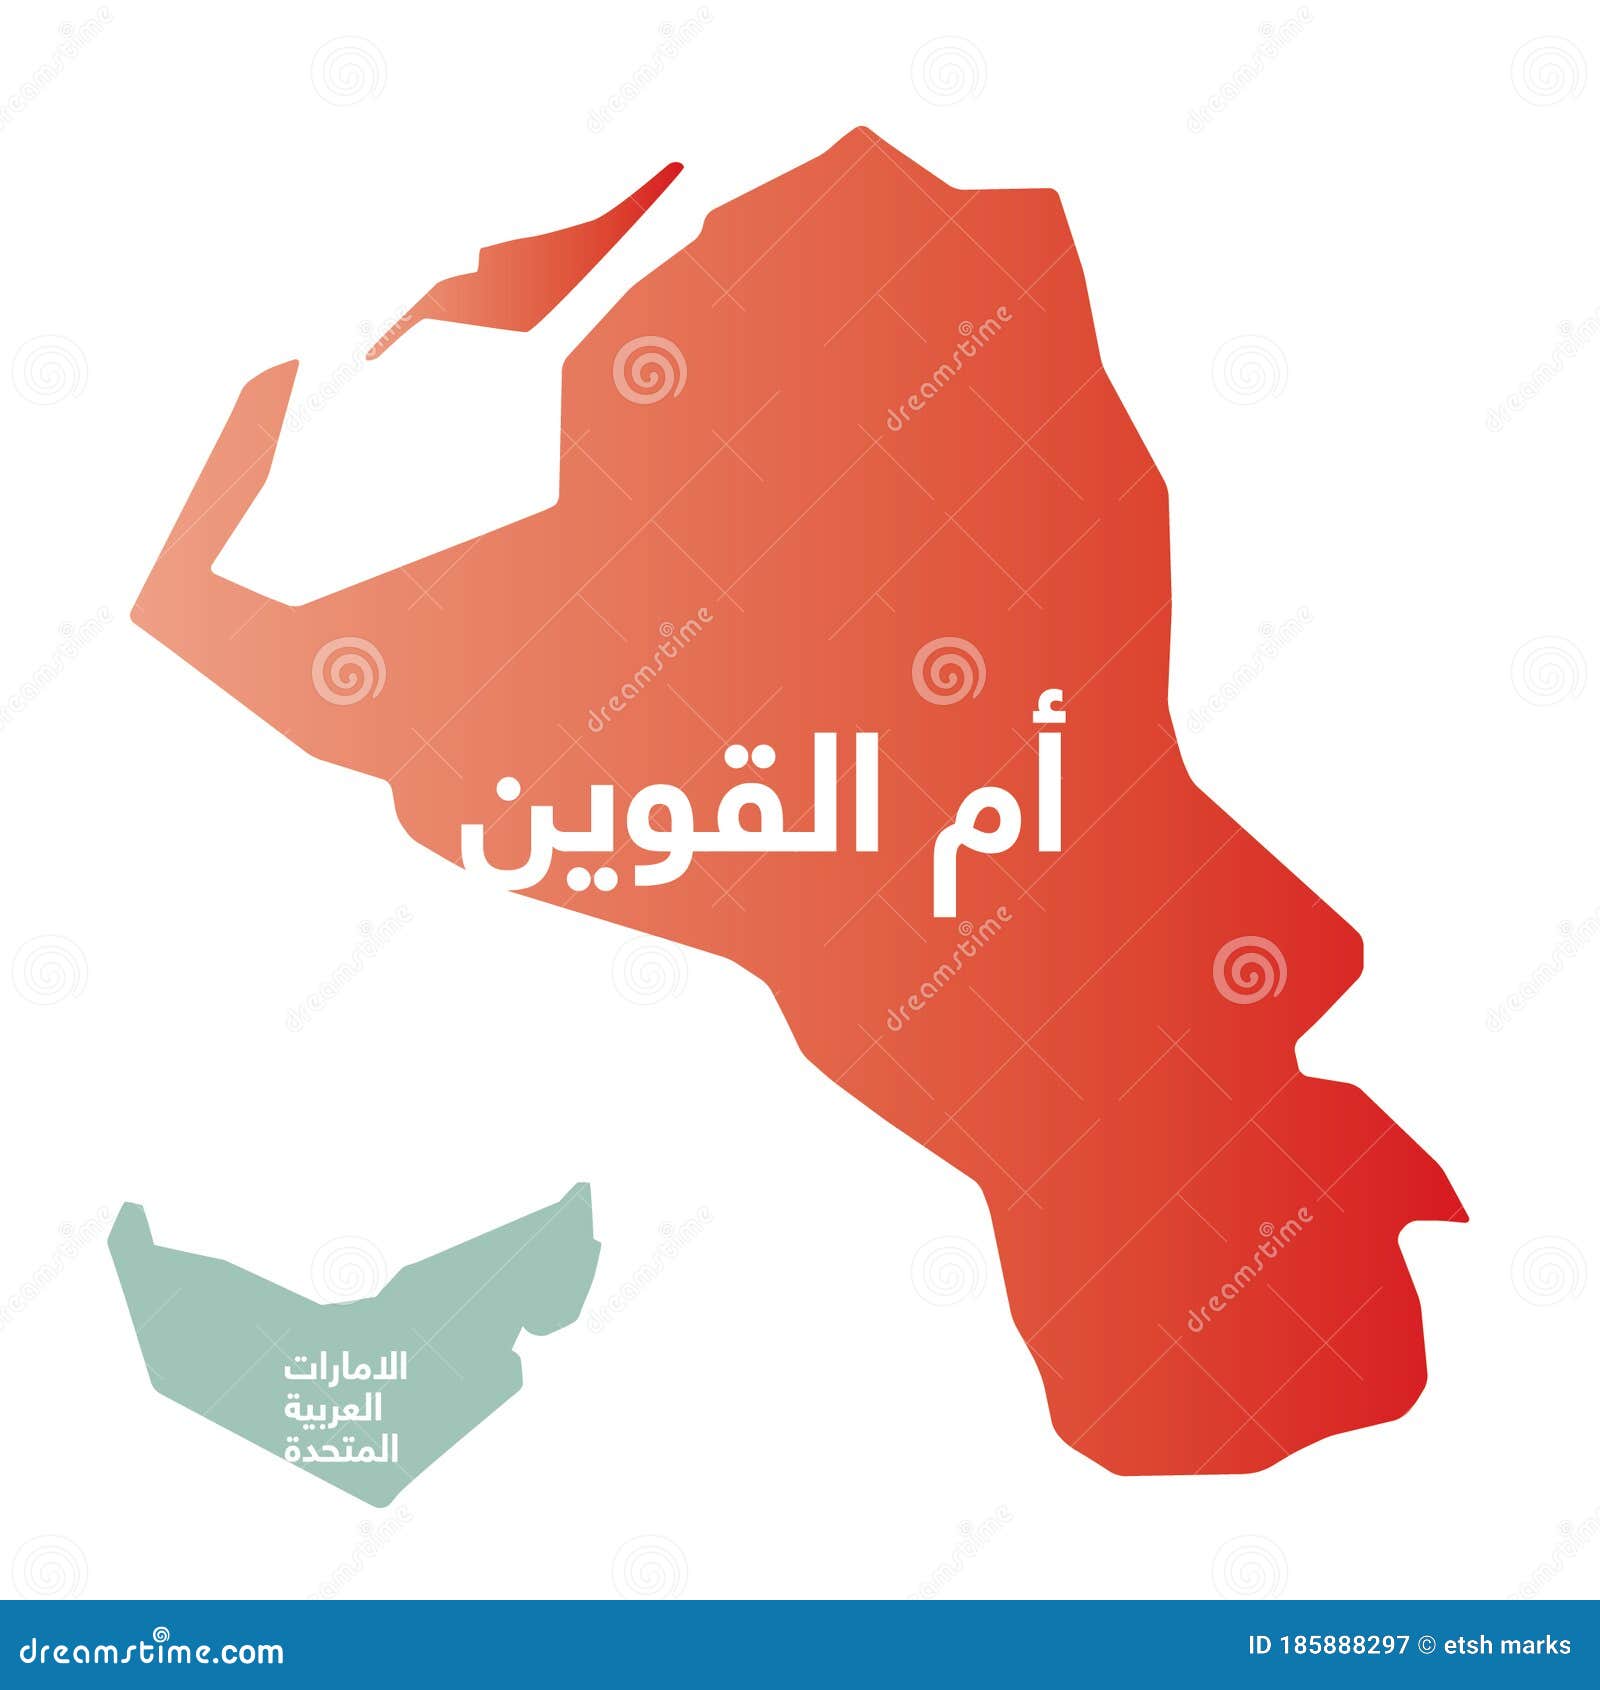 simplified map of the emirate of umm al quwain